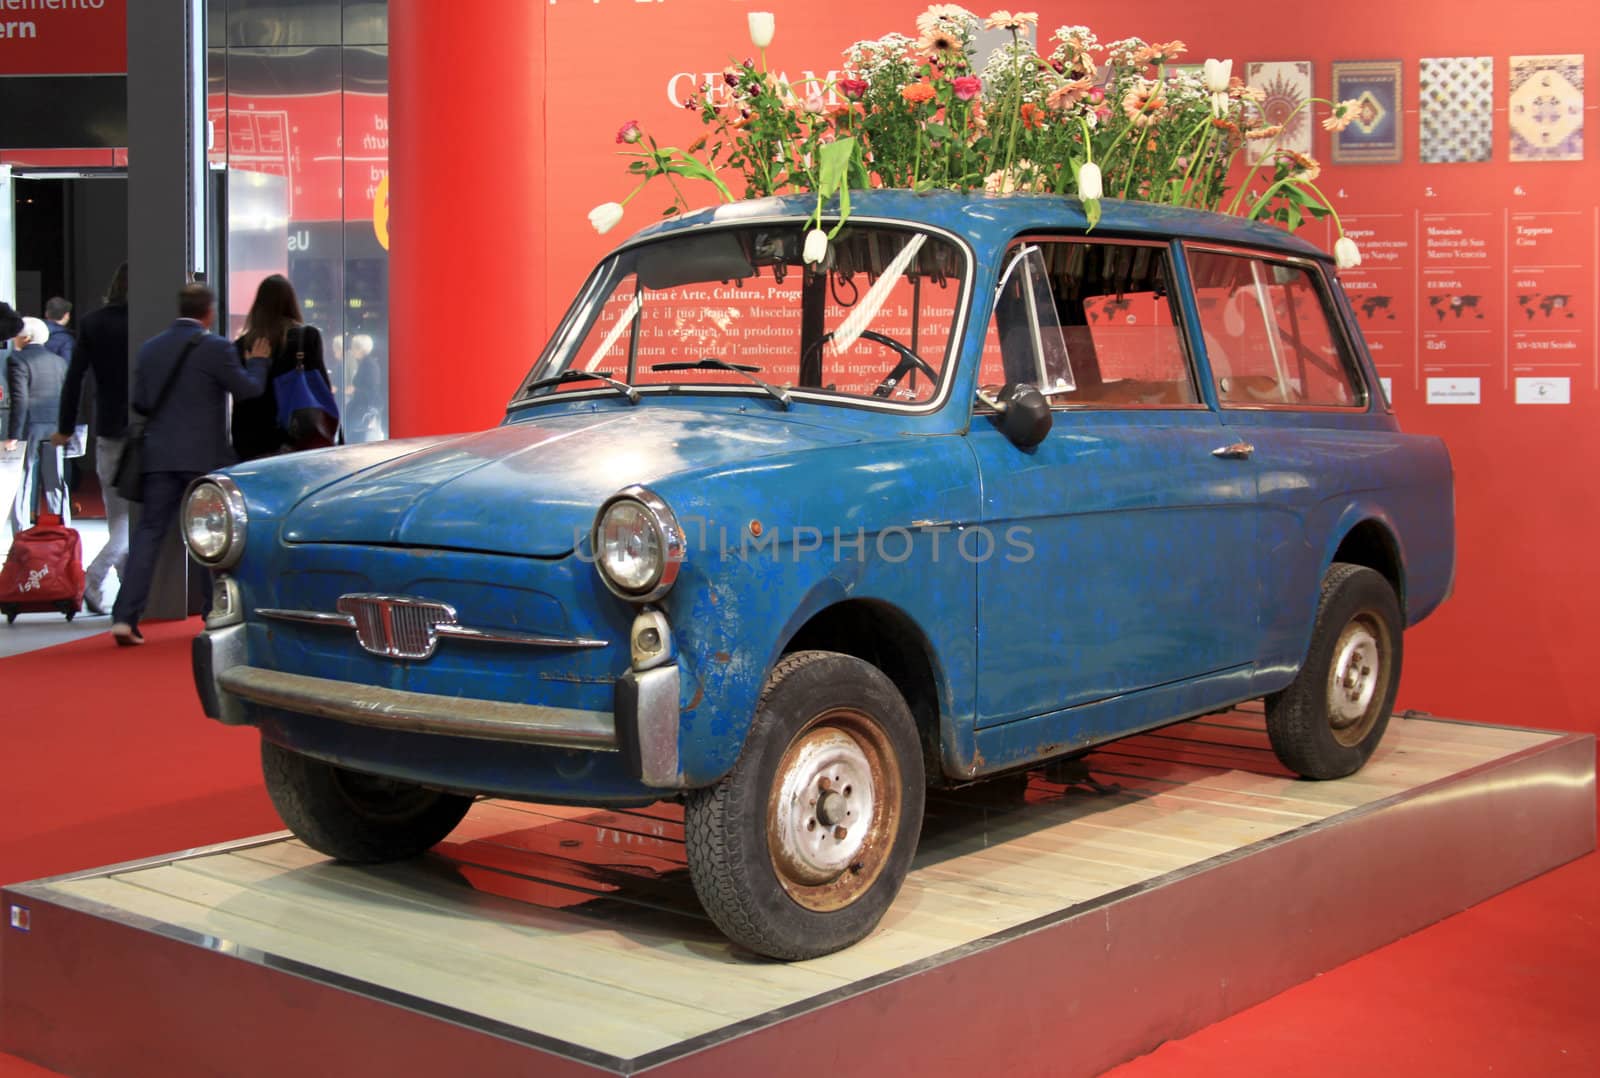 Vintage Fiat Bianchina installation at Salone Internazionale del Mobile - International home furnishing and accessories exhibition